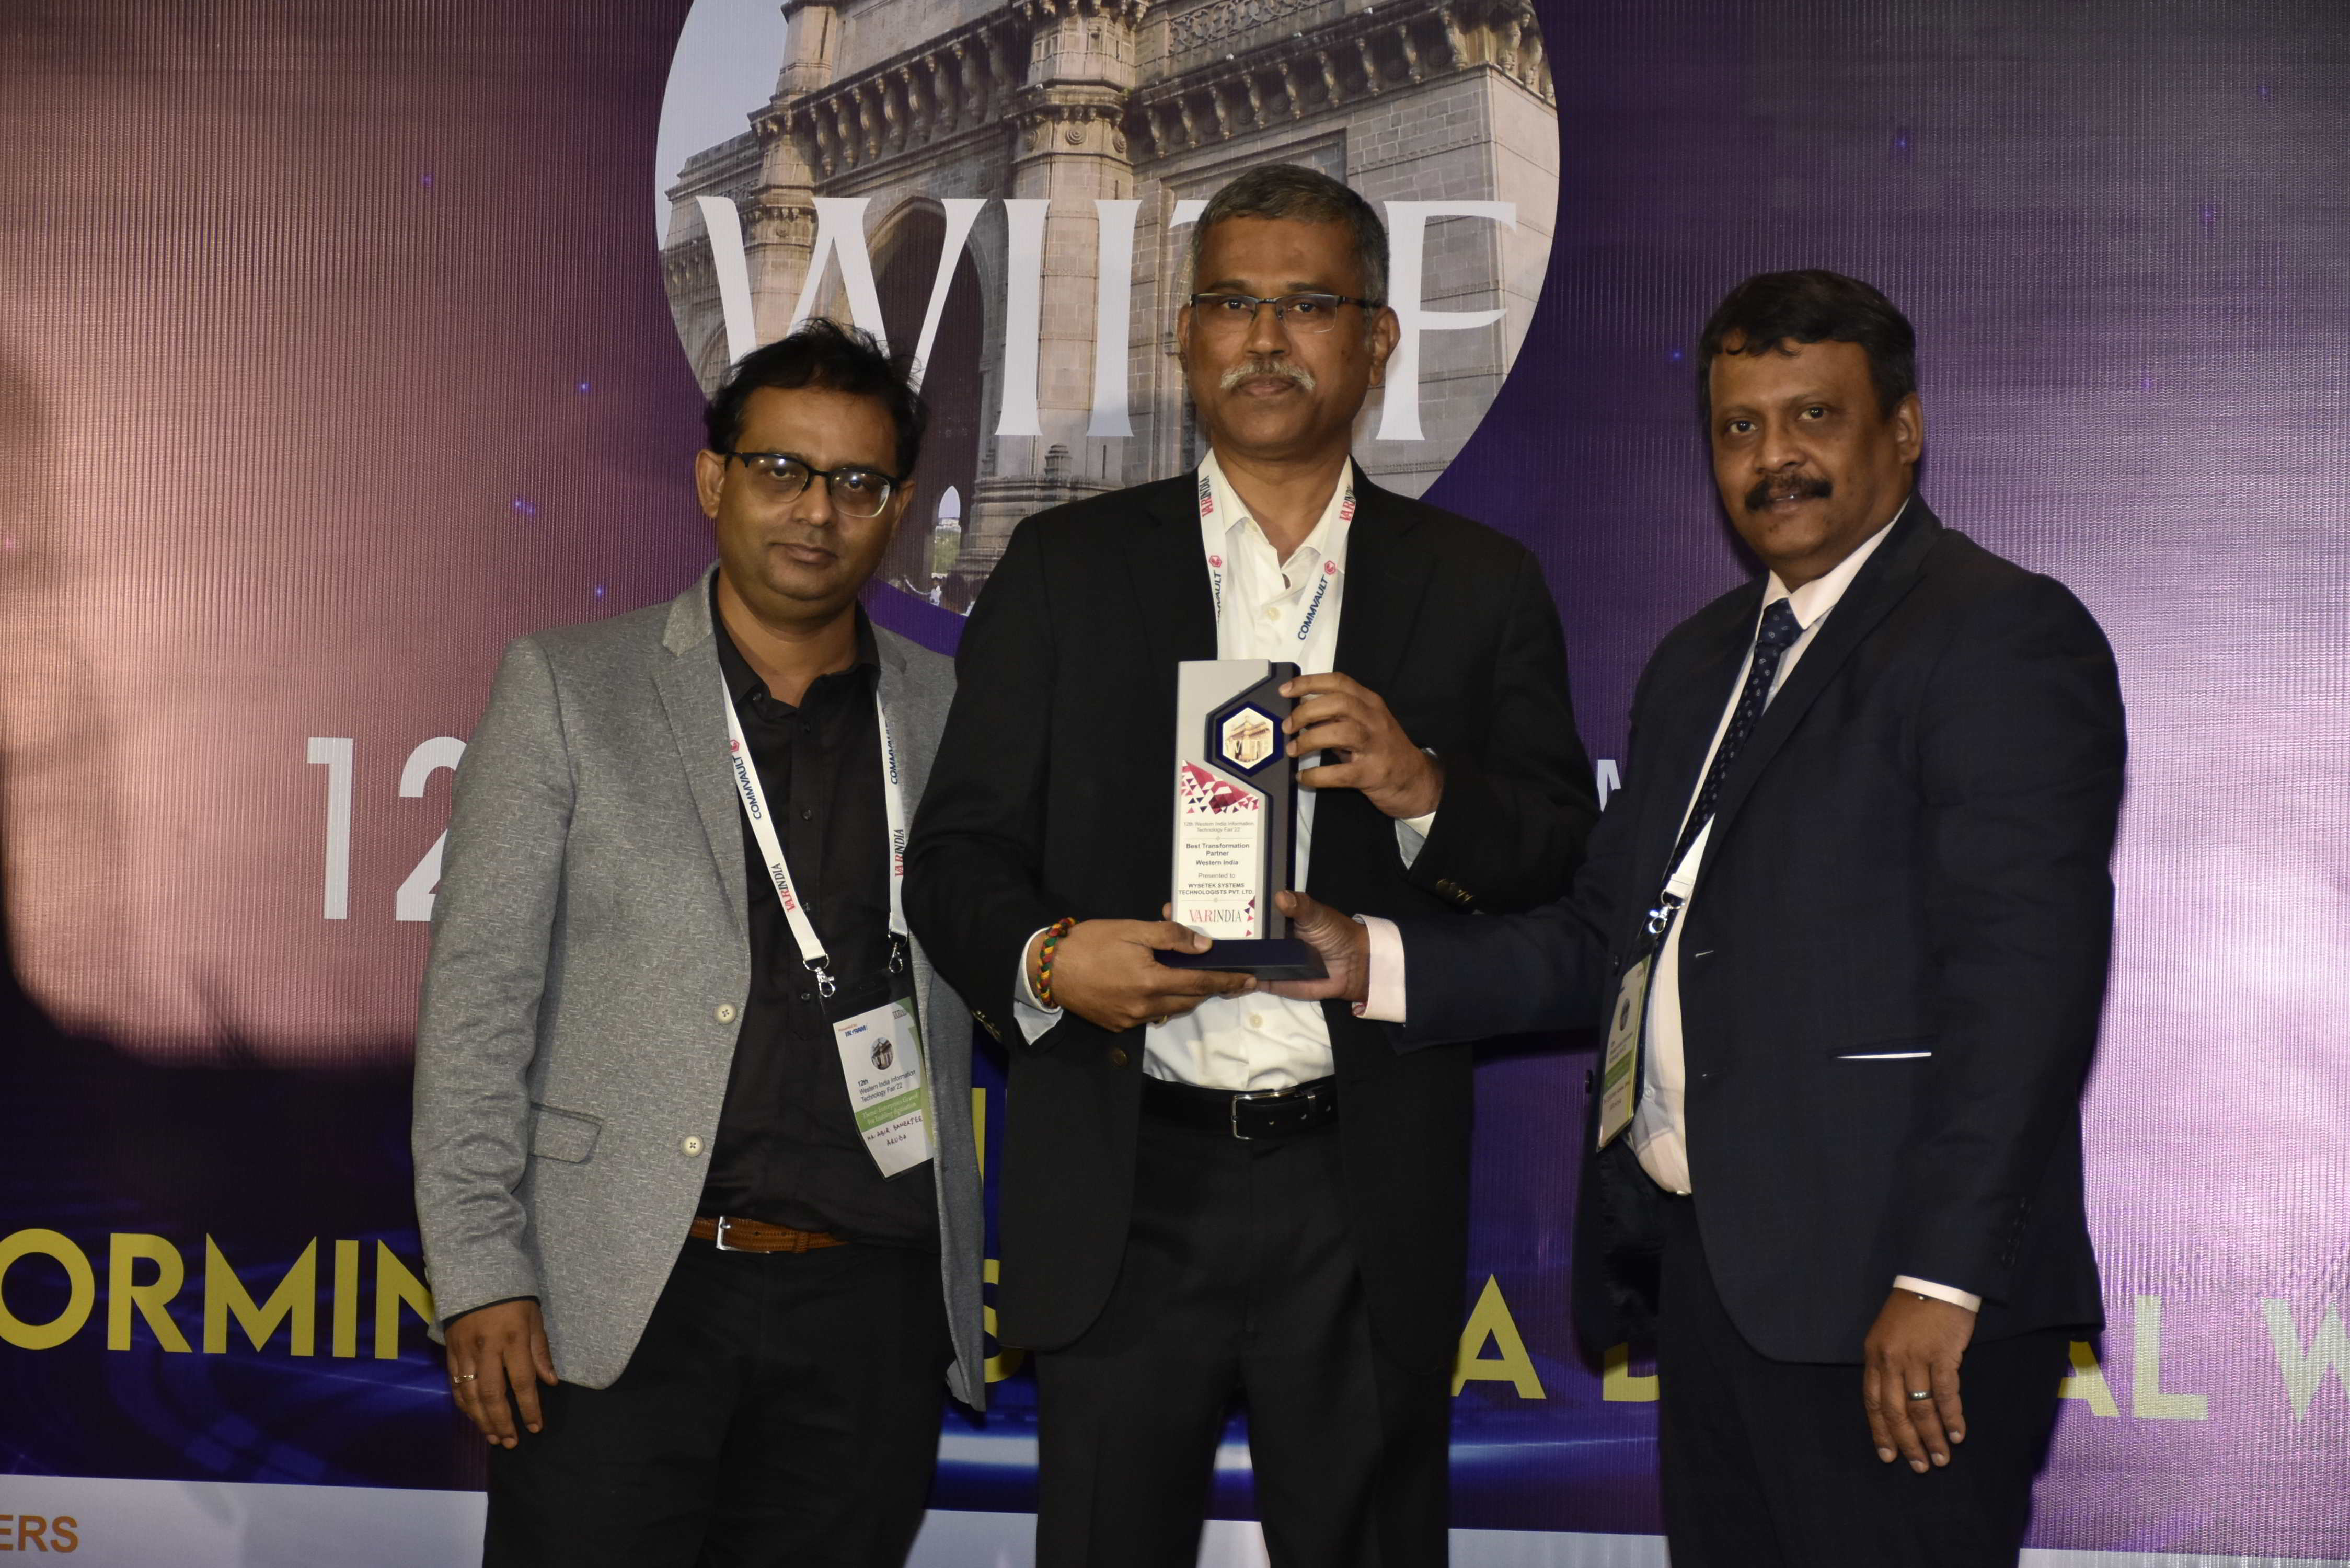 The Best Digital Transformation Partner, Western India, was won by Wysetek Systems Technologists Pvt. Ltd.